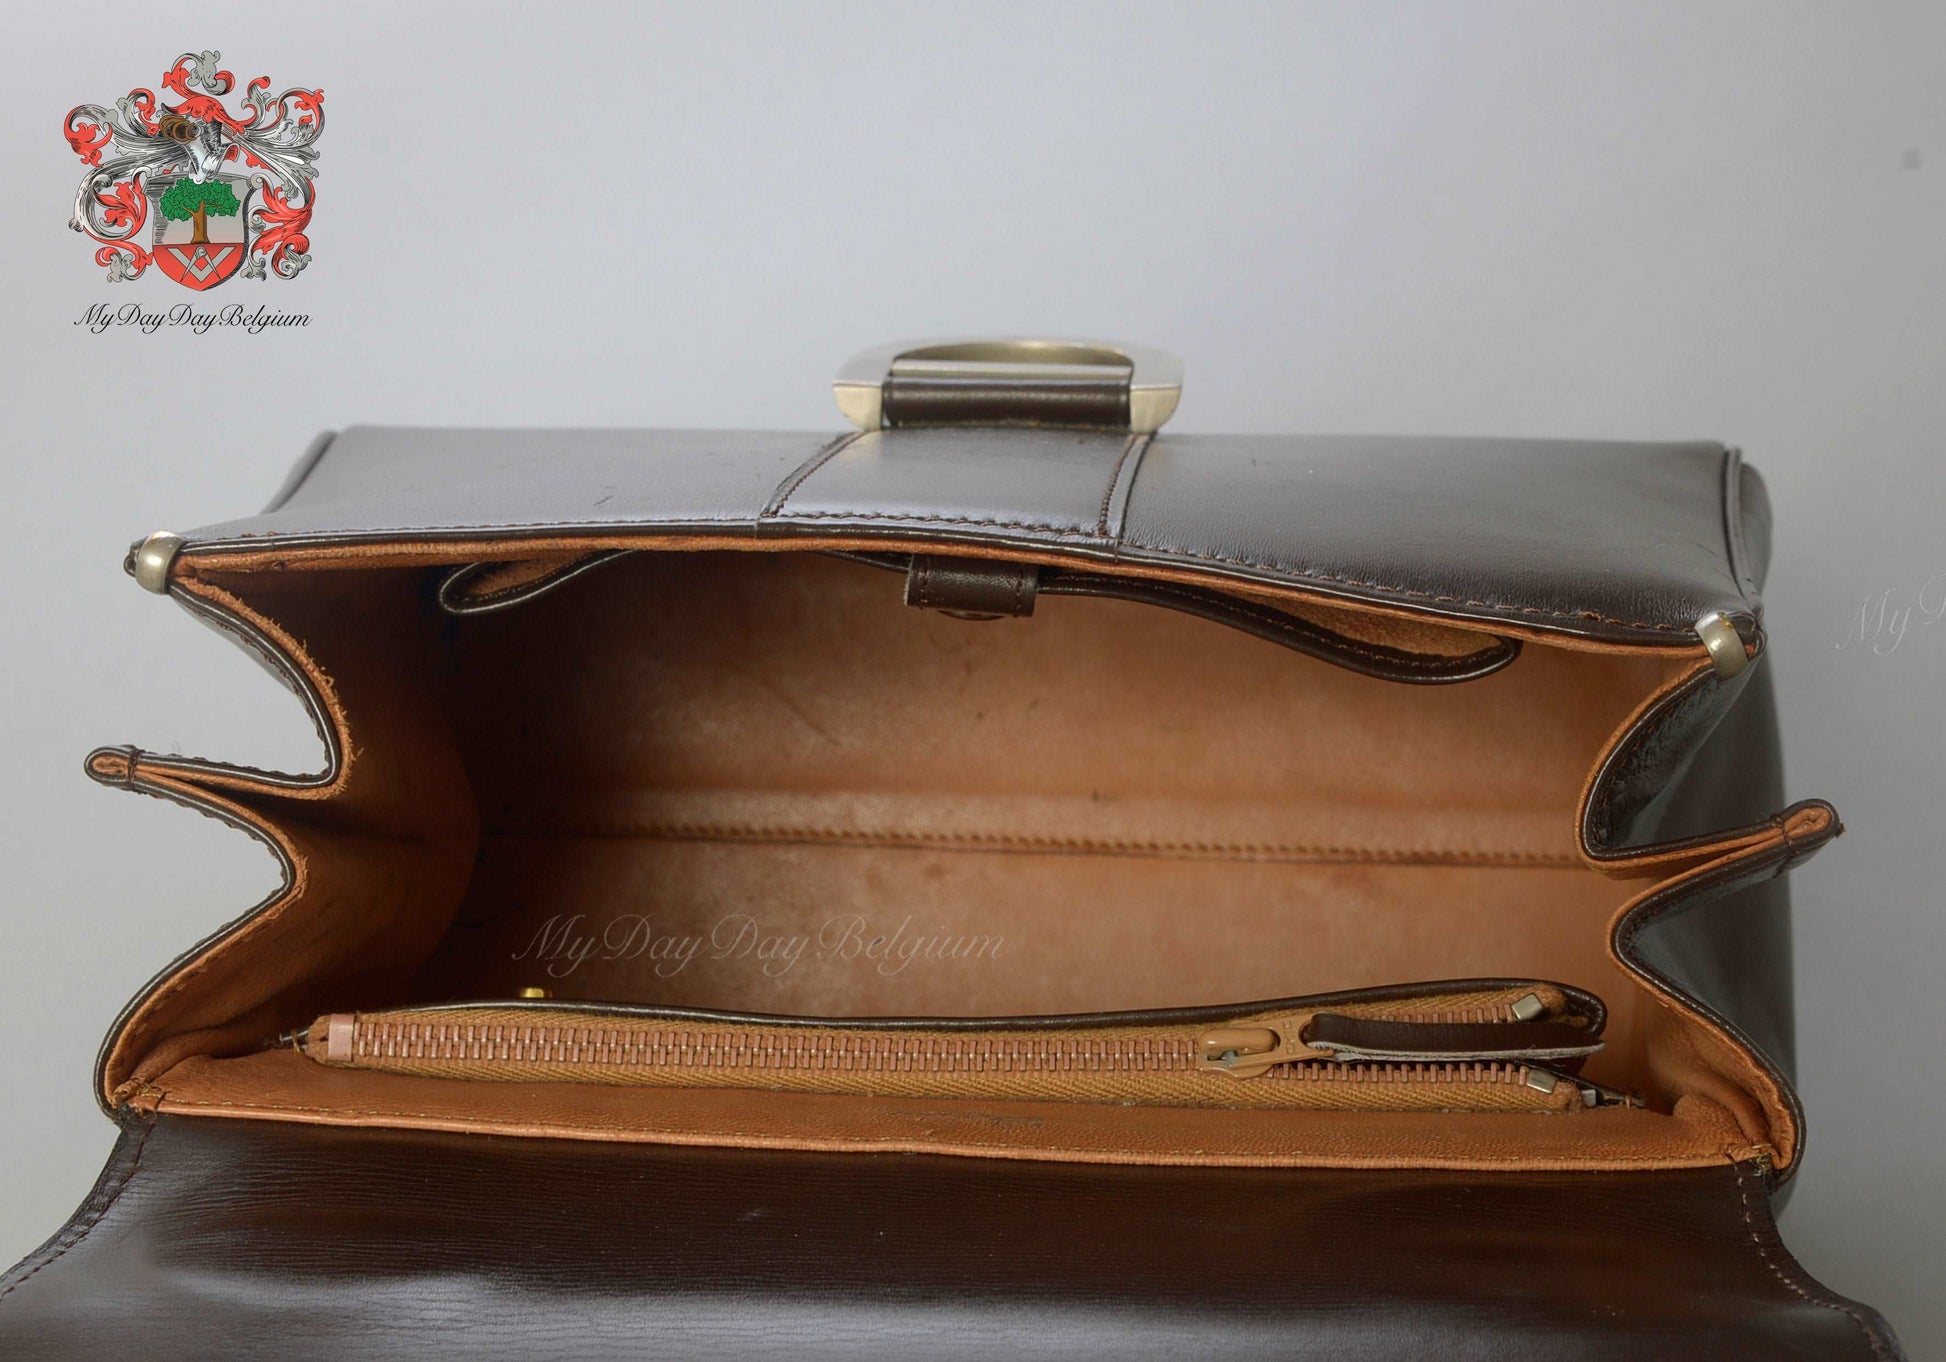 A review for the vintage lovers: my 1974 Delvaux Brillant PM : r